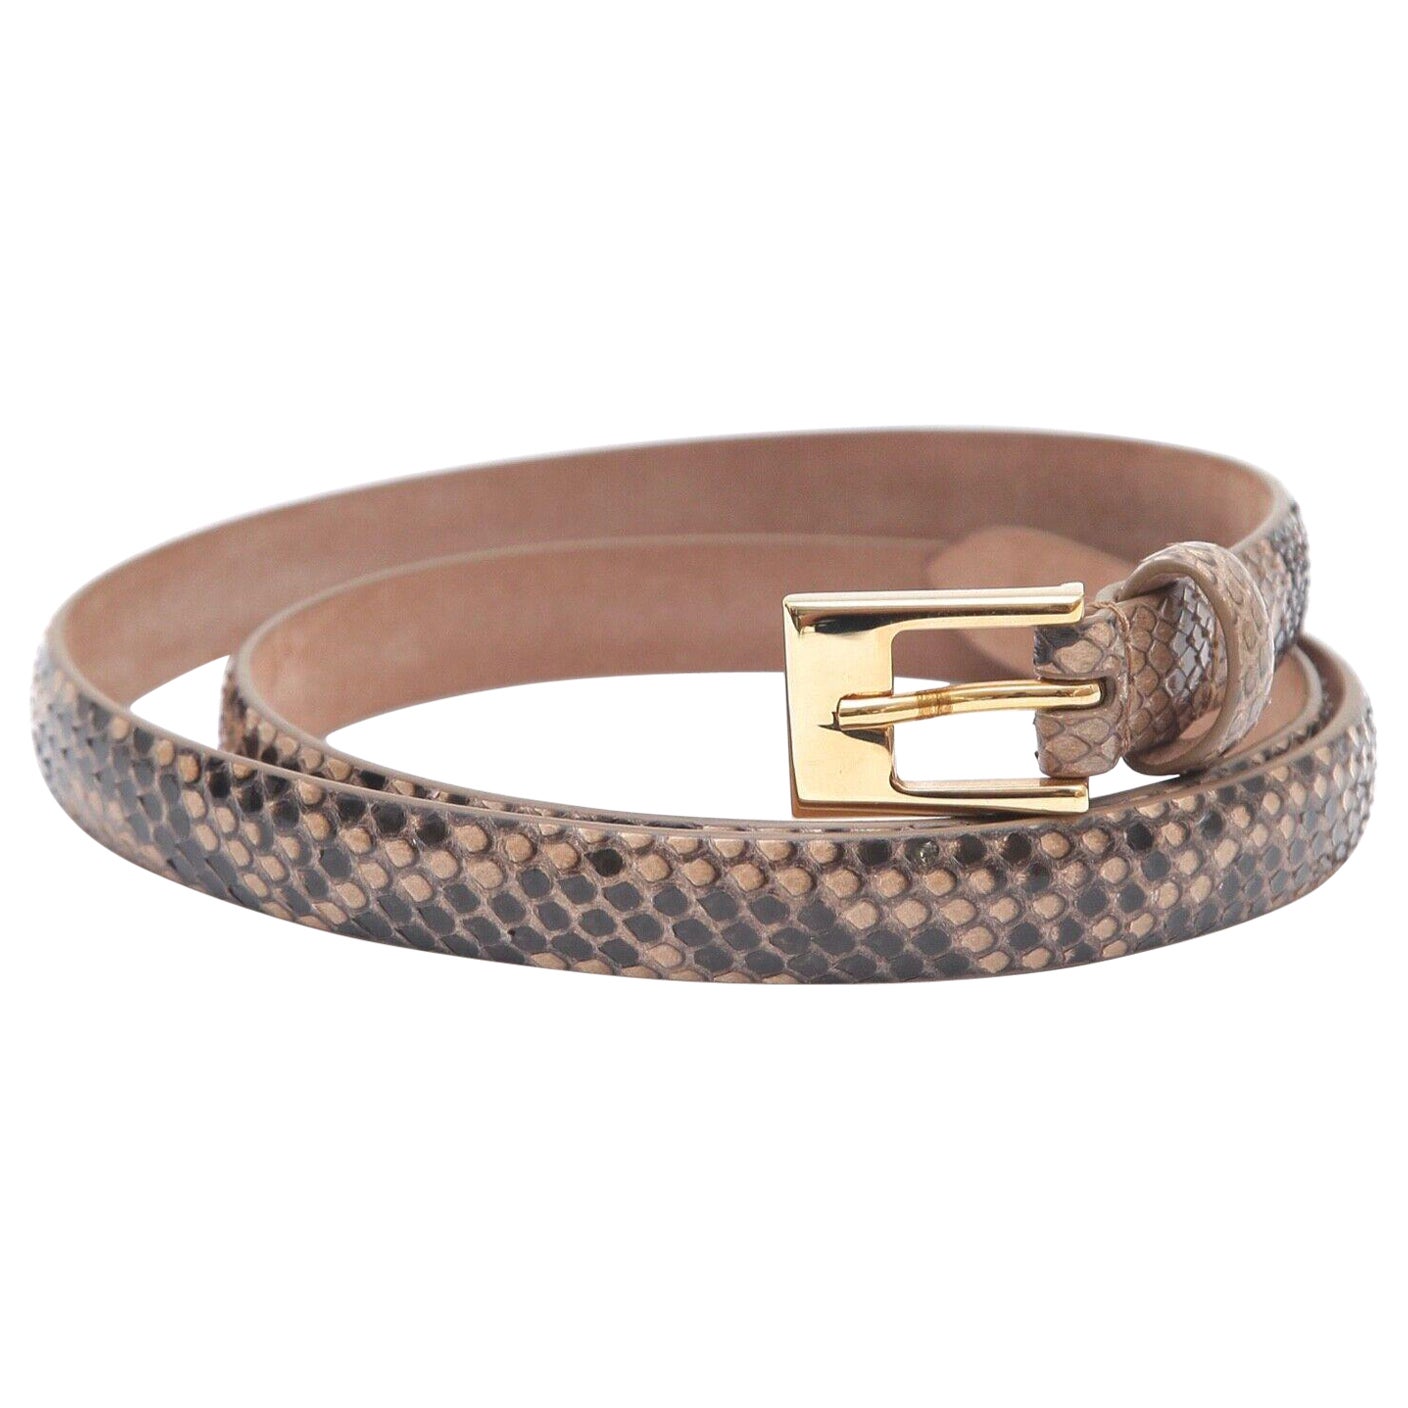 MICHAEL KORS Thin Skinny BELT Exotic Leather Brown Gold HW Buckle S For Sale